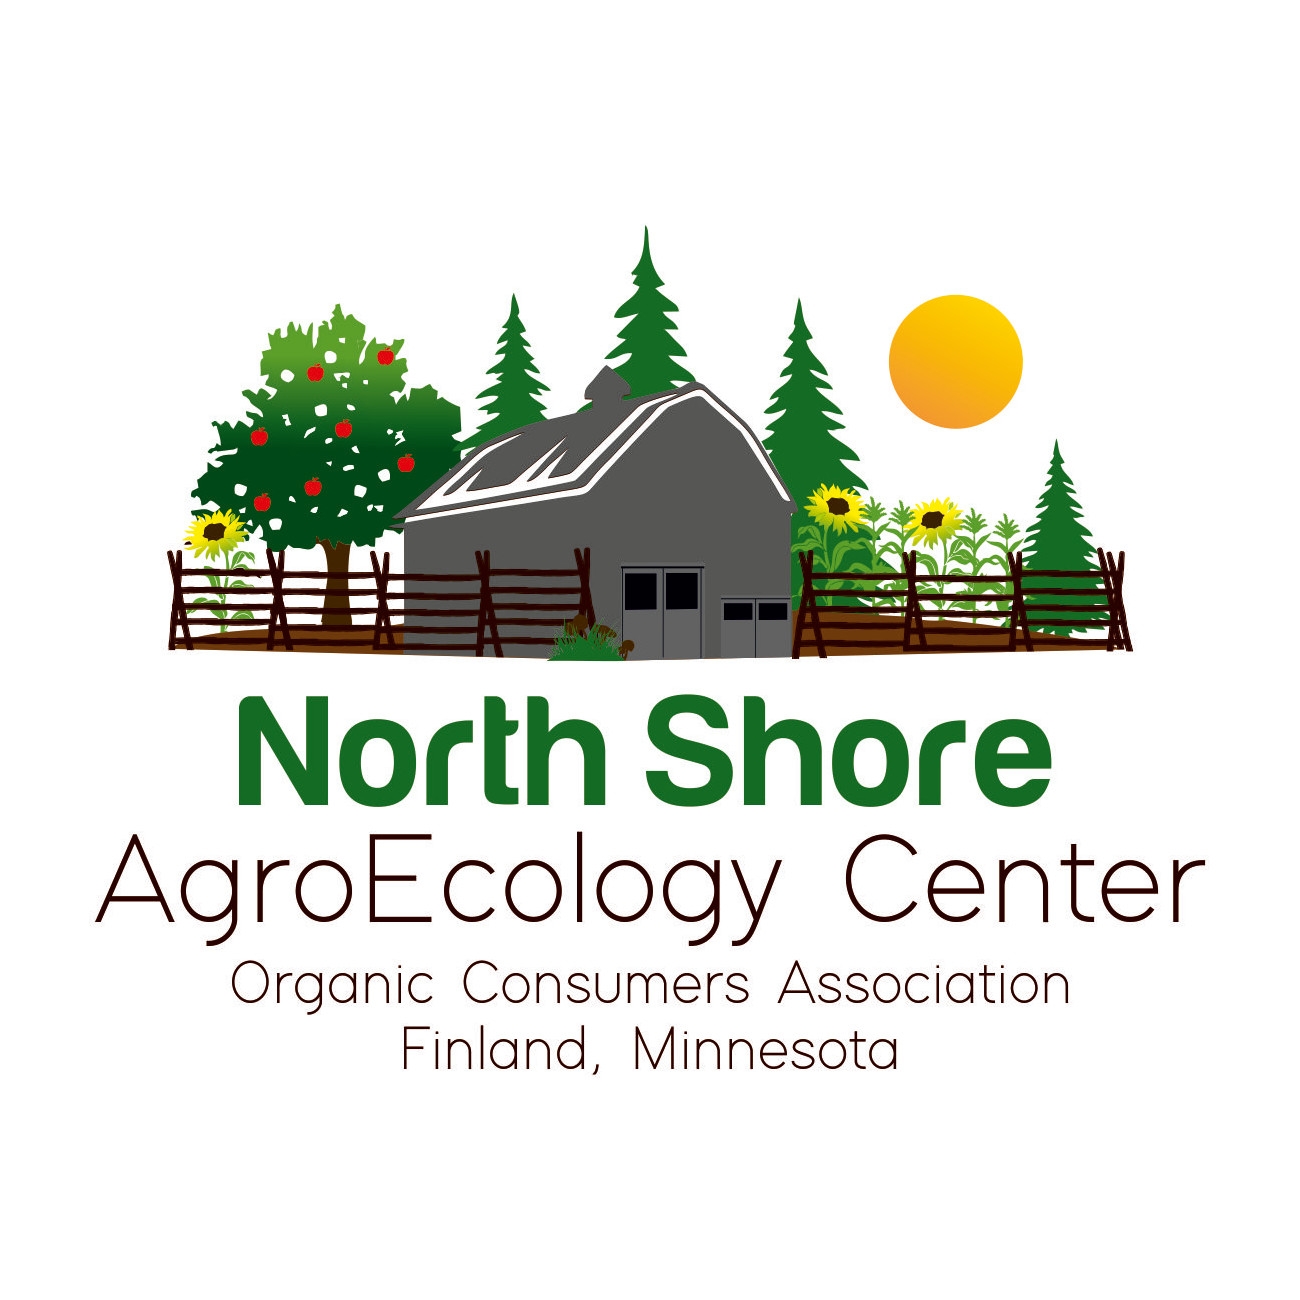 North Shore AgroEcology Center